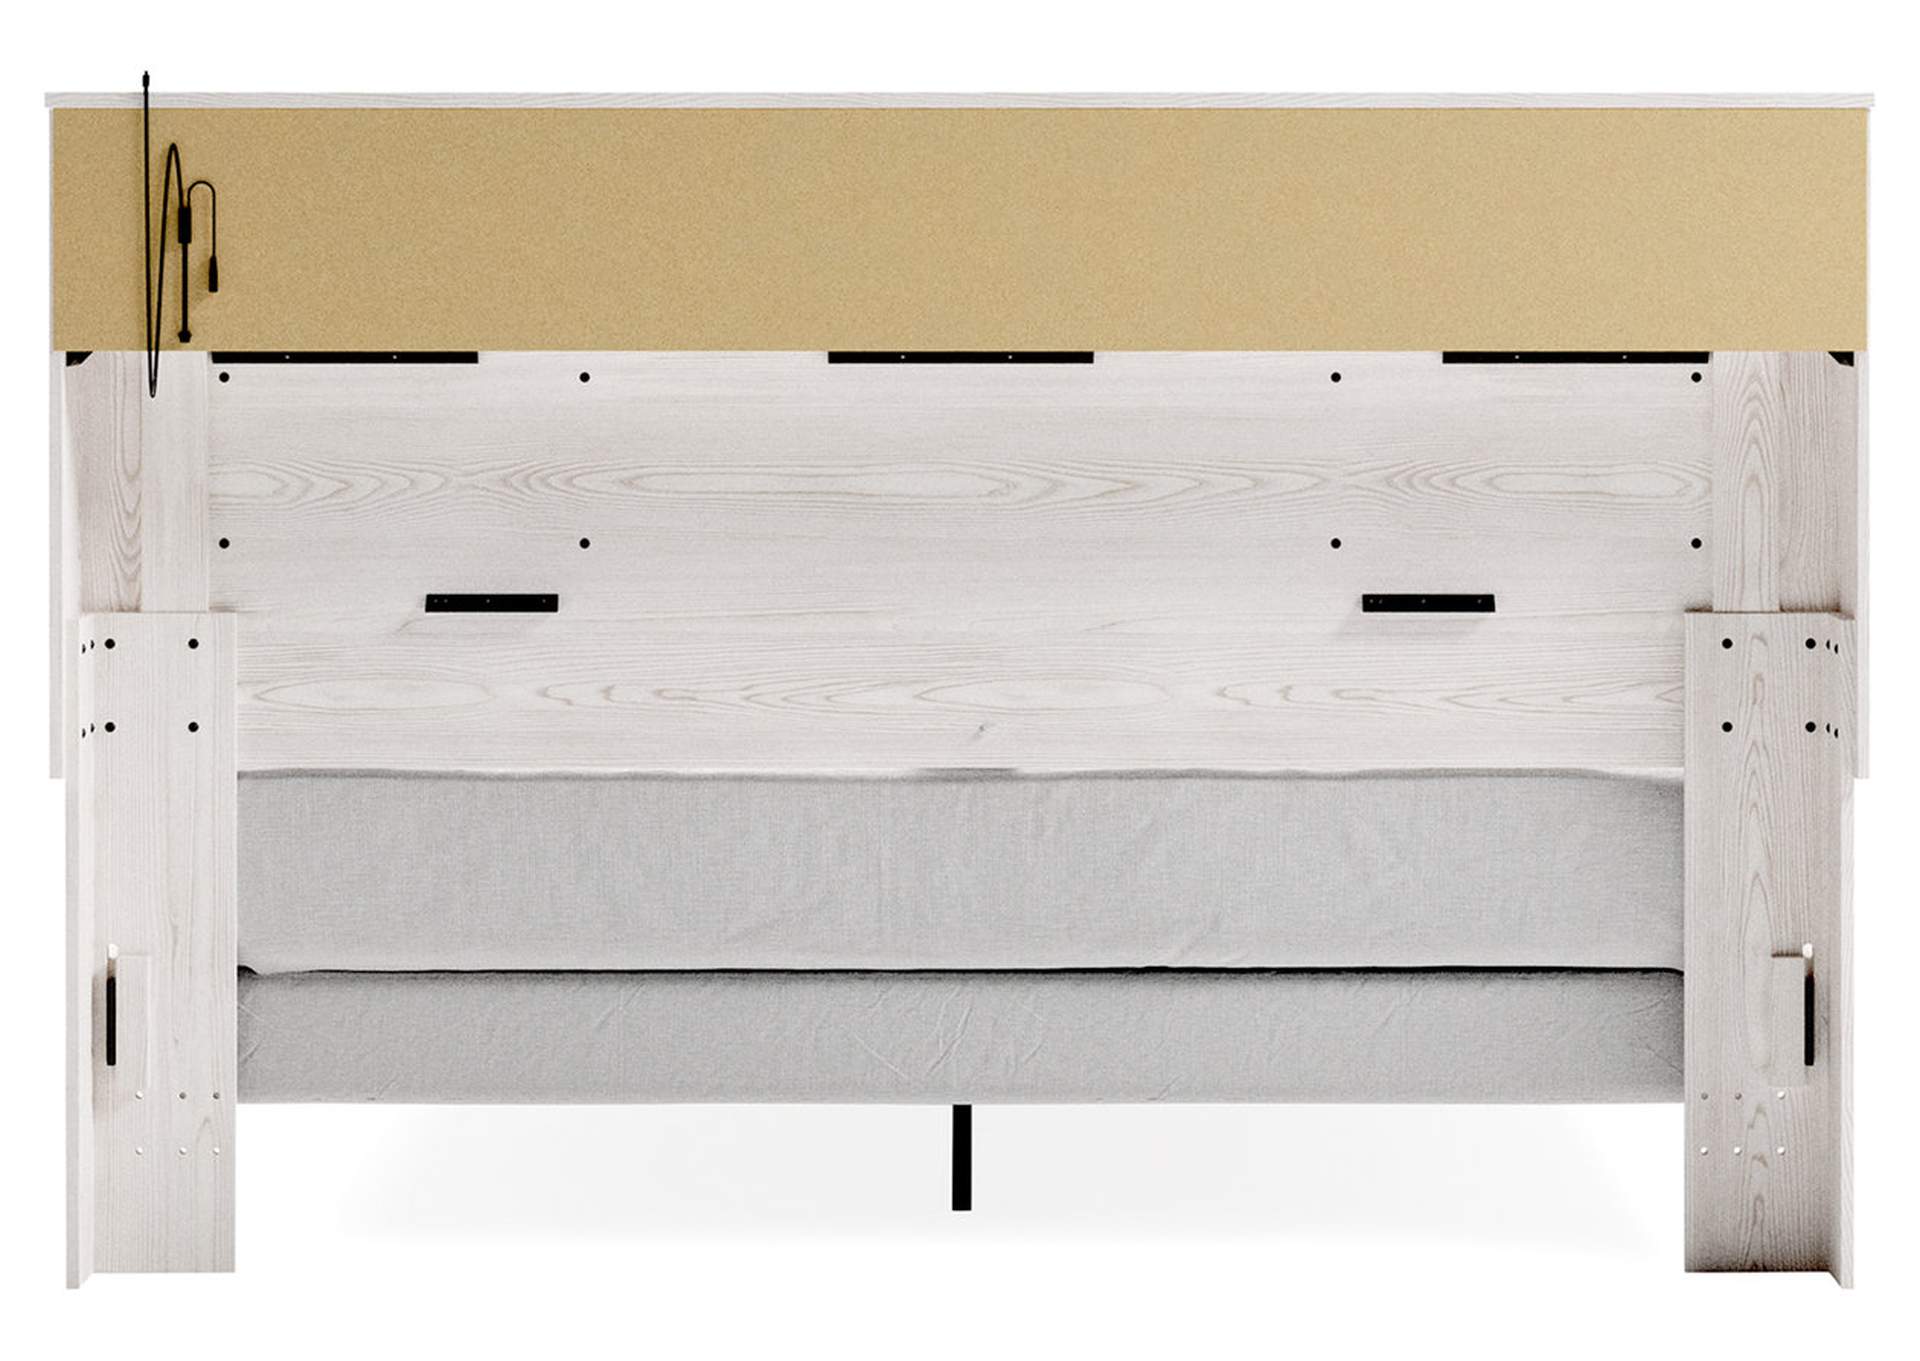 Altyra King Panel Bookcase Bed,Signature Design By Ashley